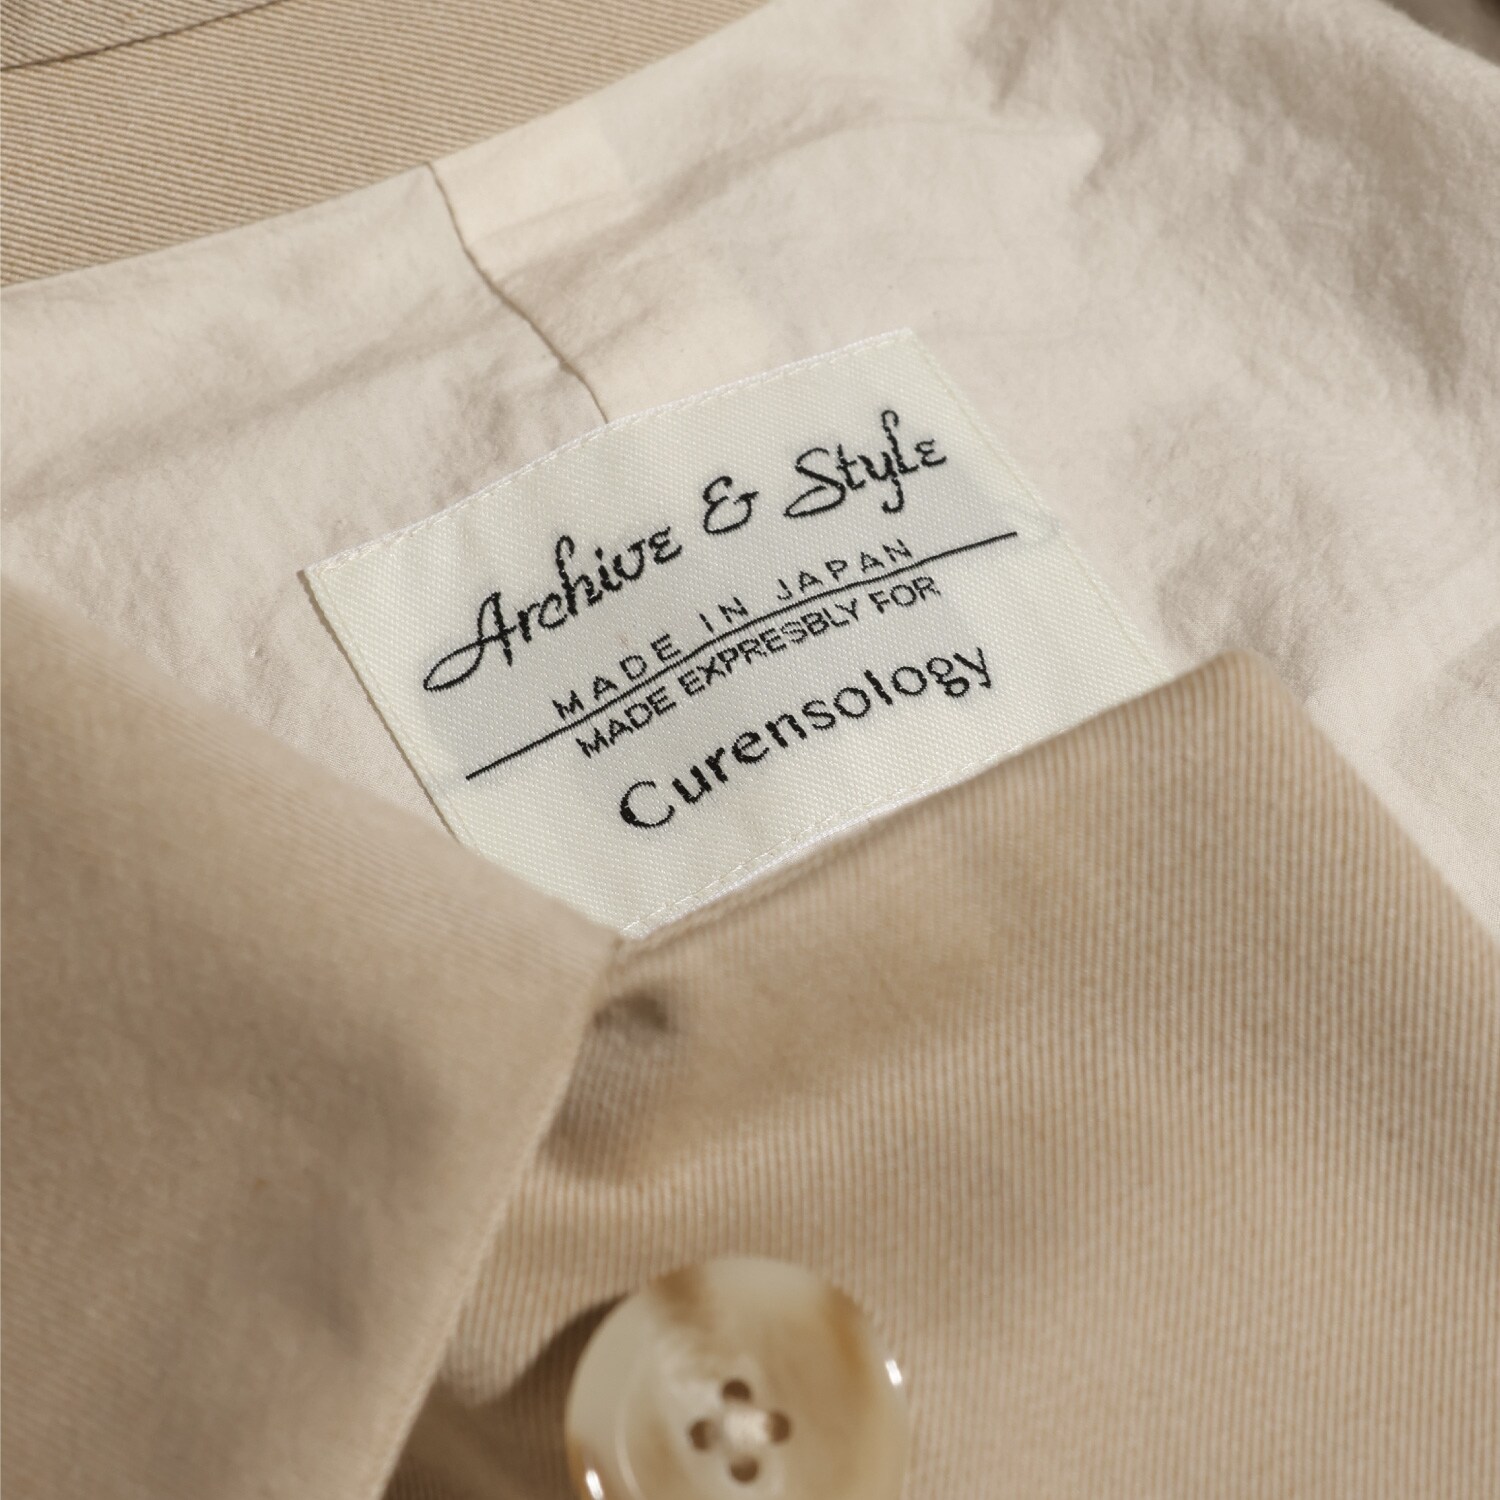 Archive&Style | Curensology 5th Anniversary